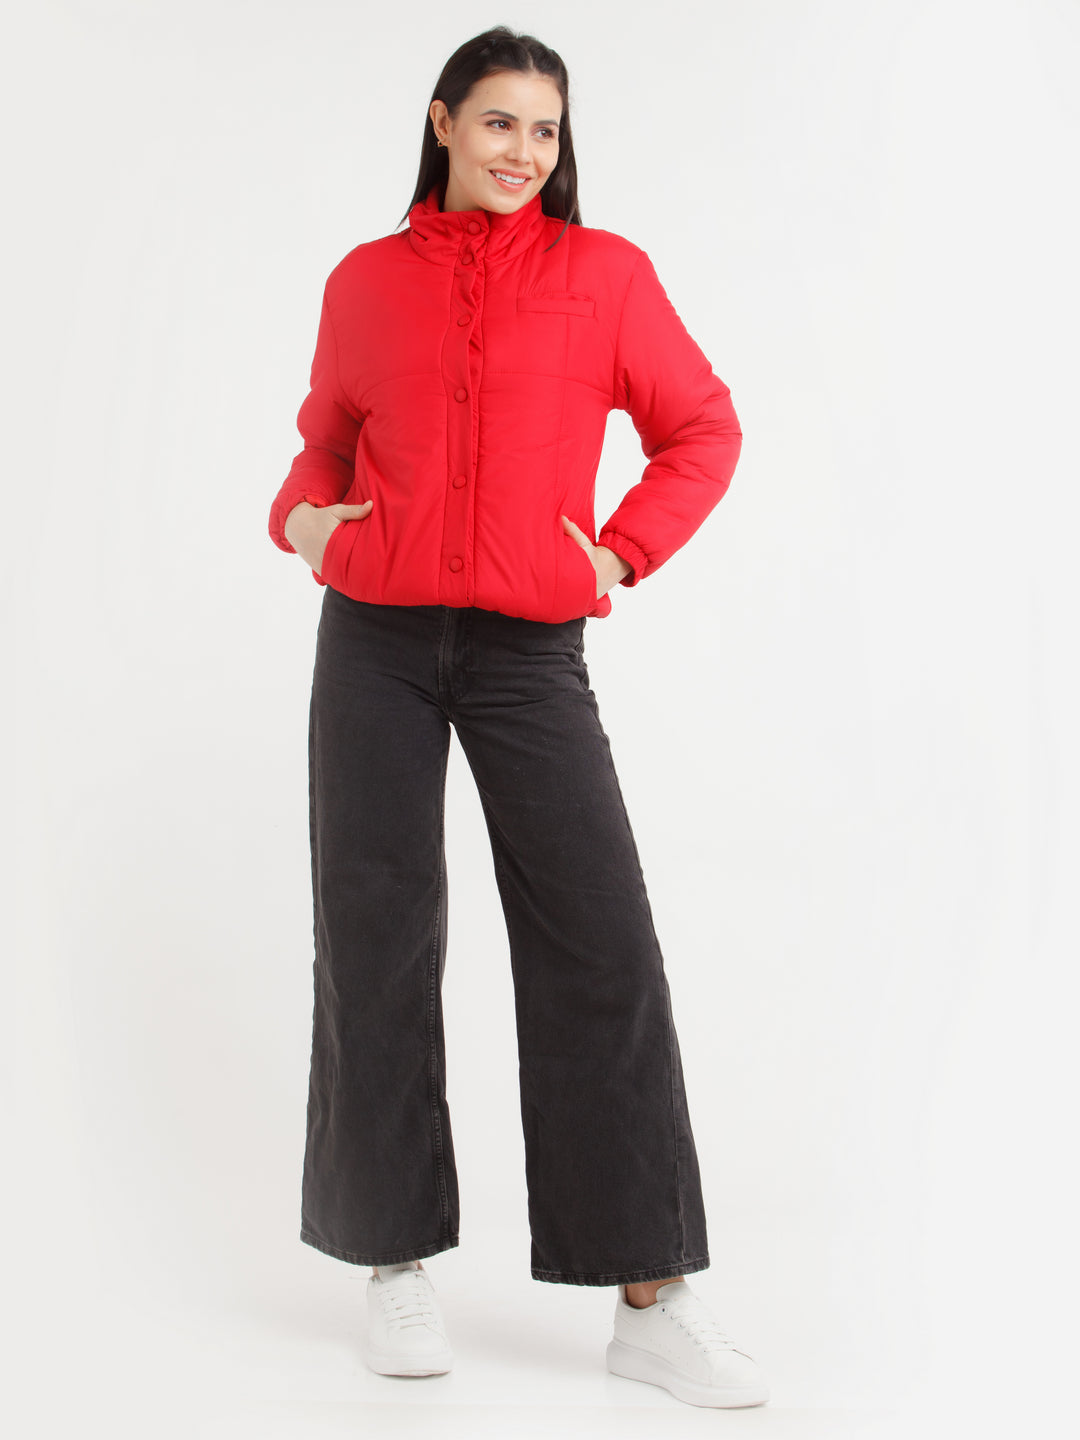 Red Solid Jacket For Women